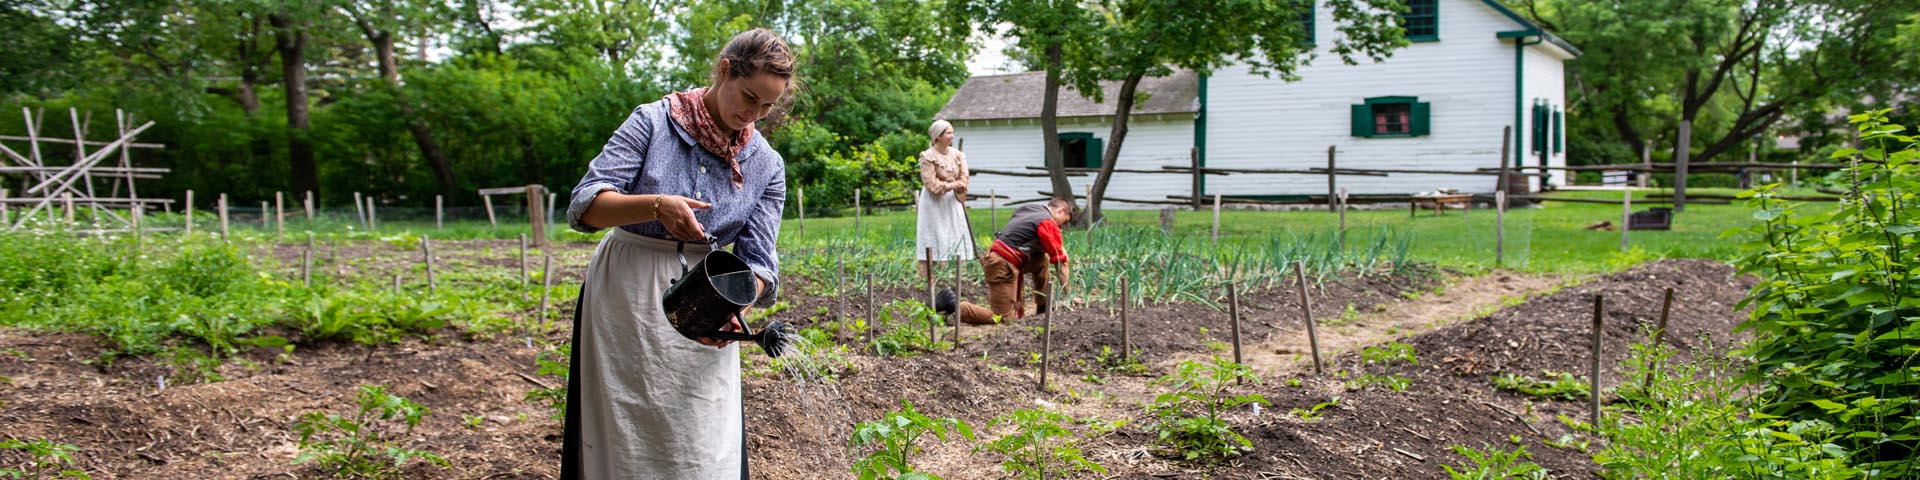 Historical interpreters tend to the Riel House garden.